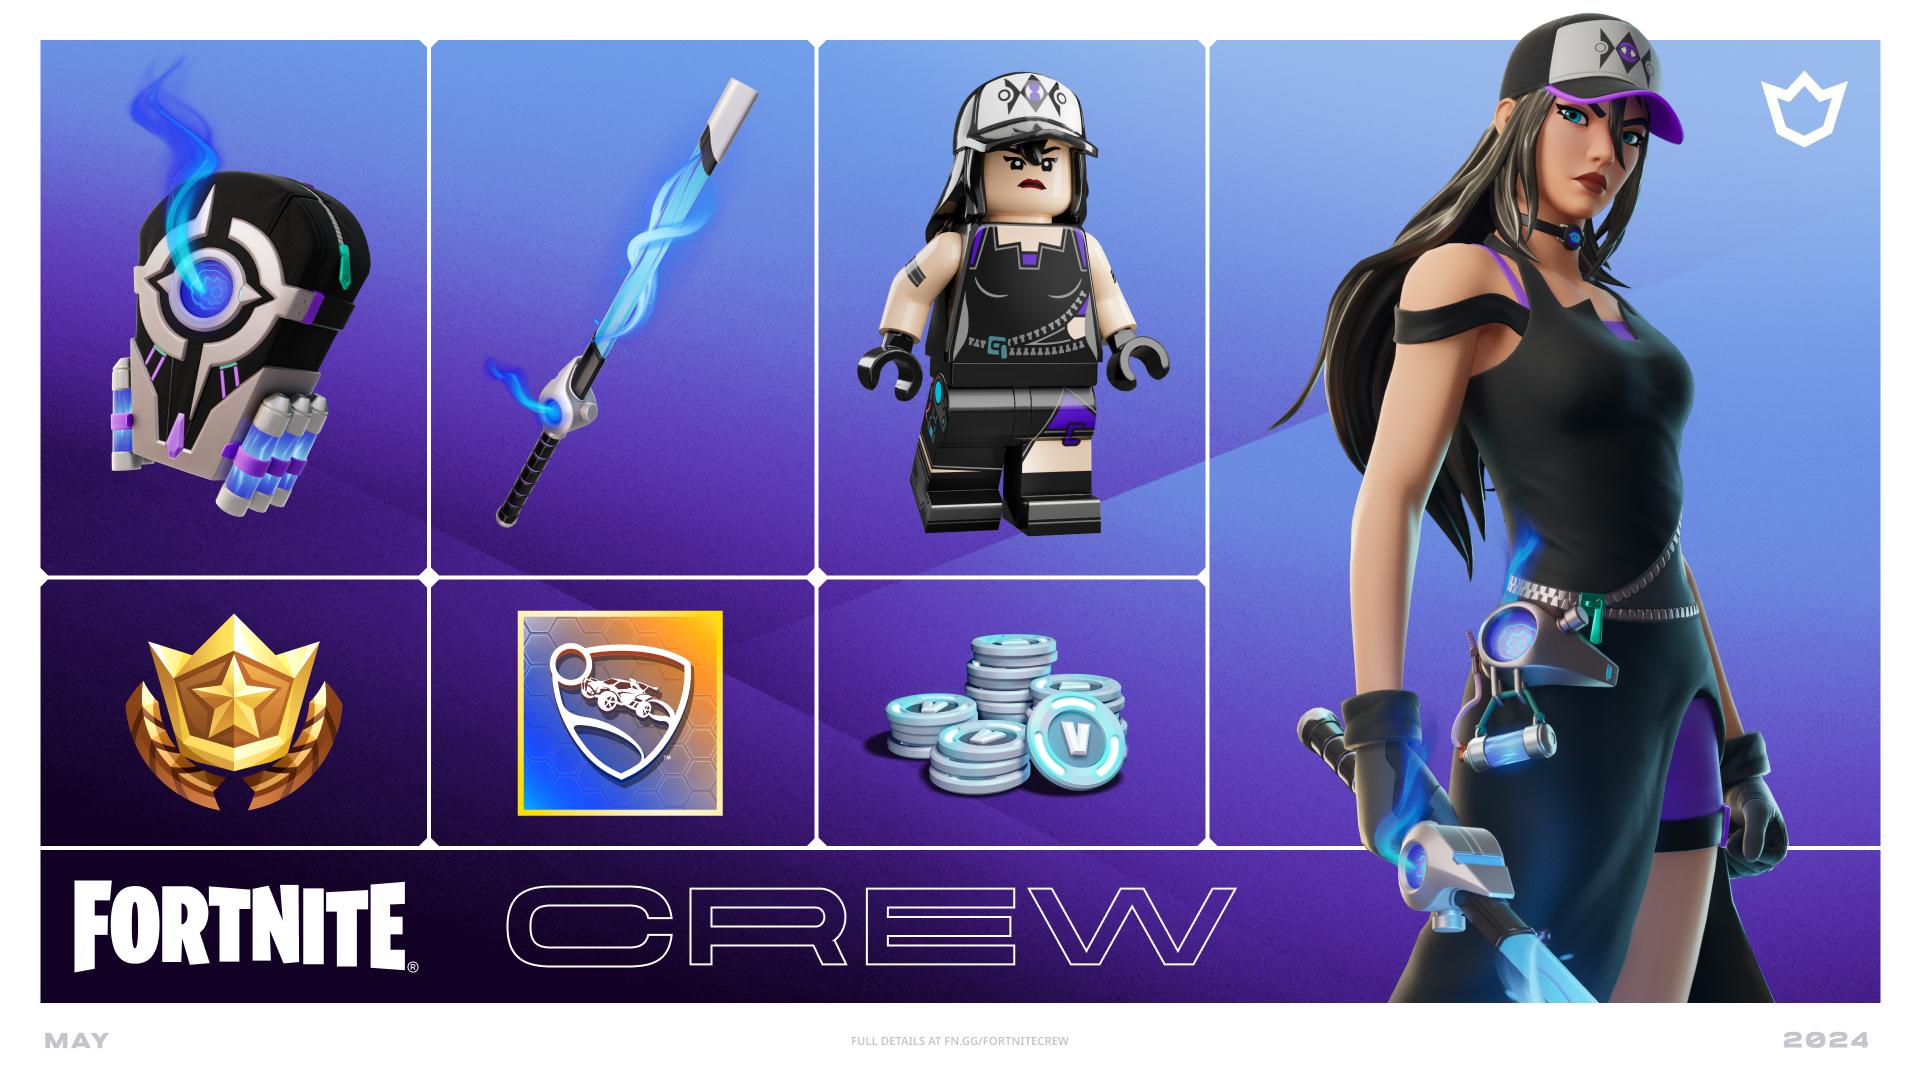 Fortnite May Crew Pack skins and cosmetics.